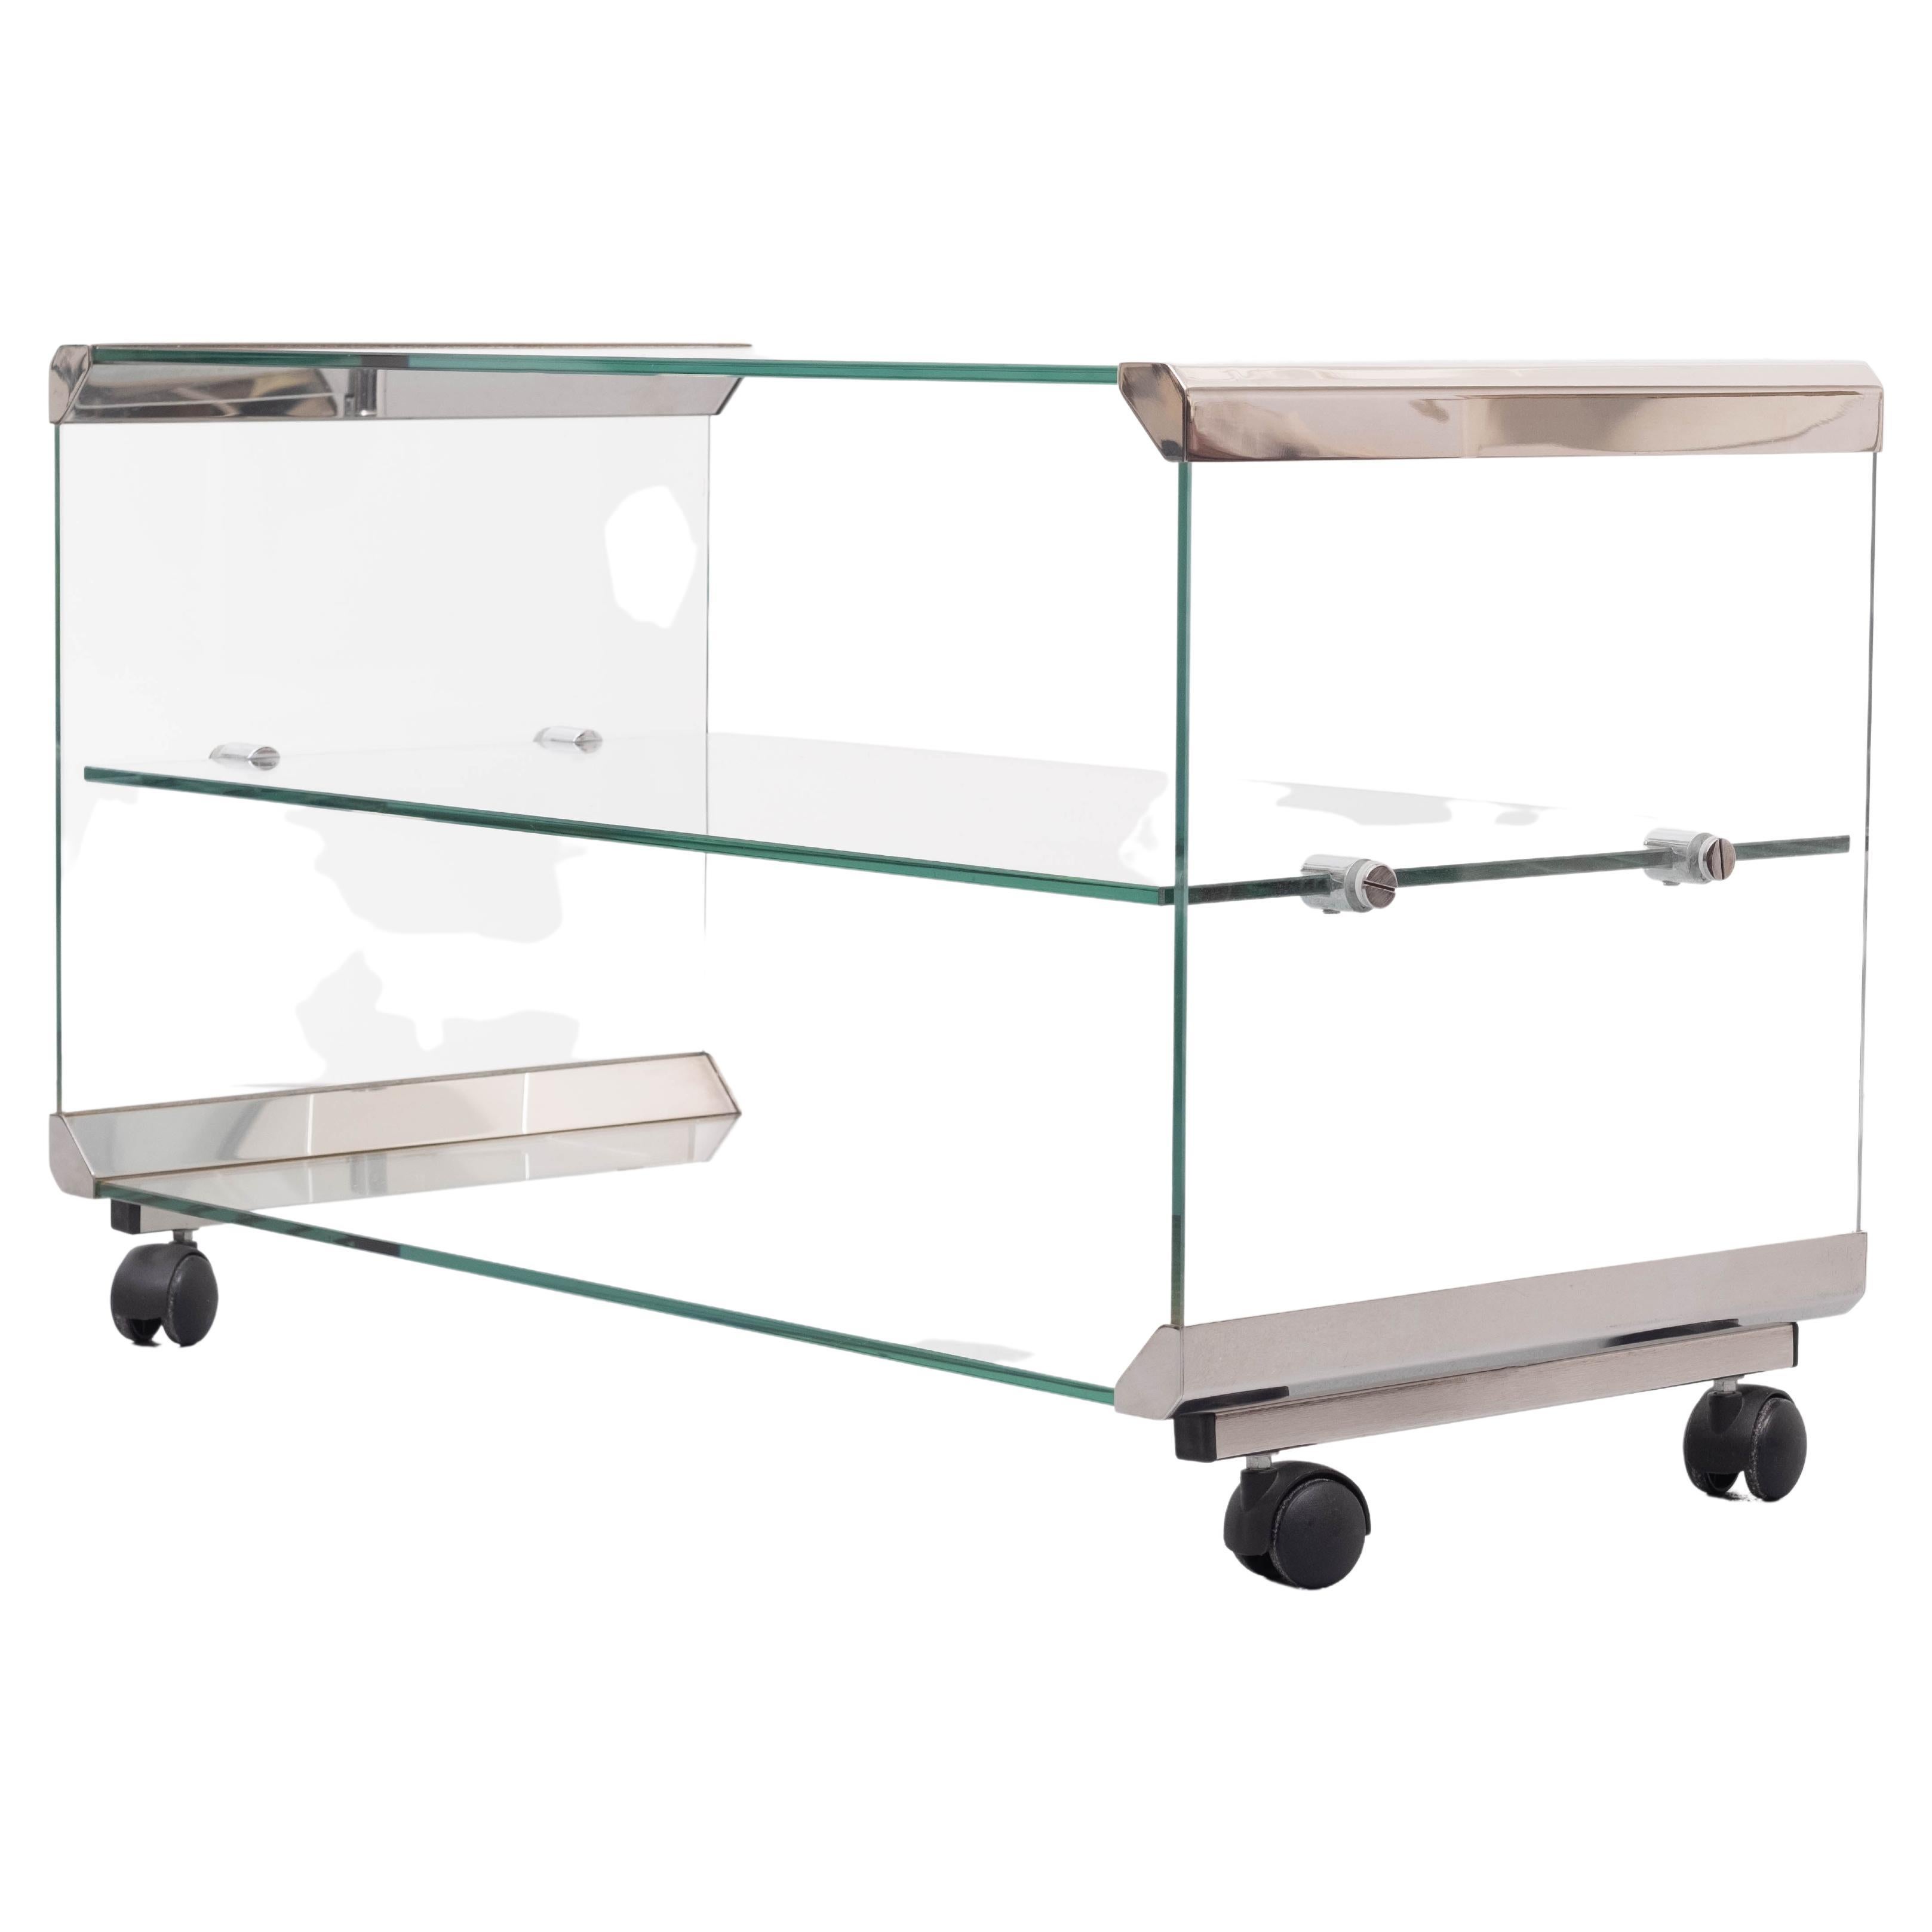 A beautiful glass trolley by Galloti & Radice from Italy. Made in the 1970s, this lovely table on black wheels is made of high quality clear glass. The grey metal edges are used as connections and adds a luxurious style to the piece that allows it